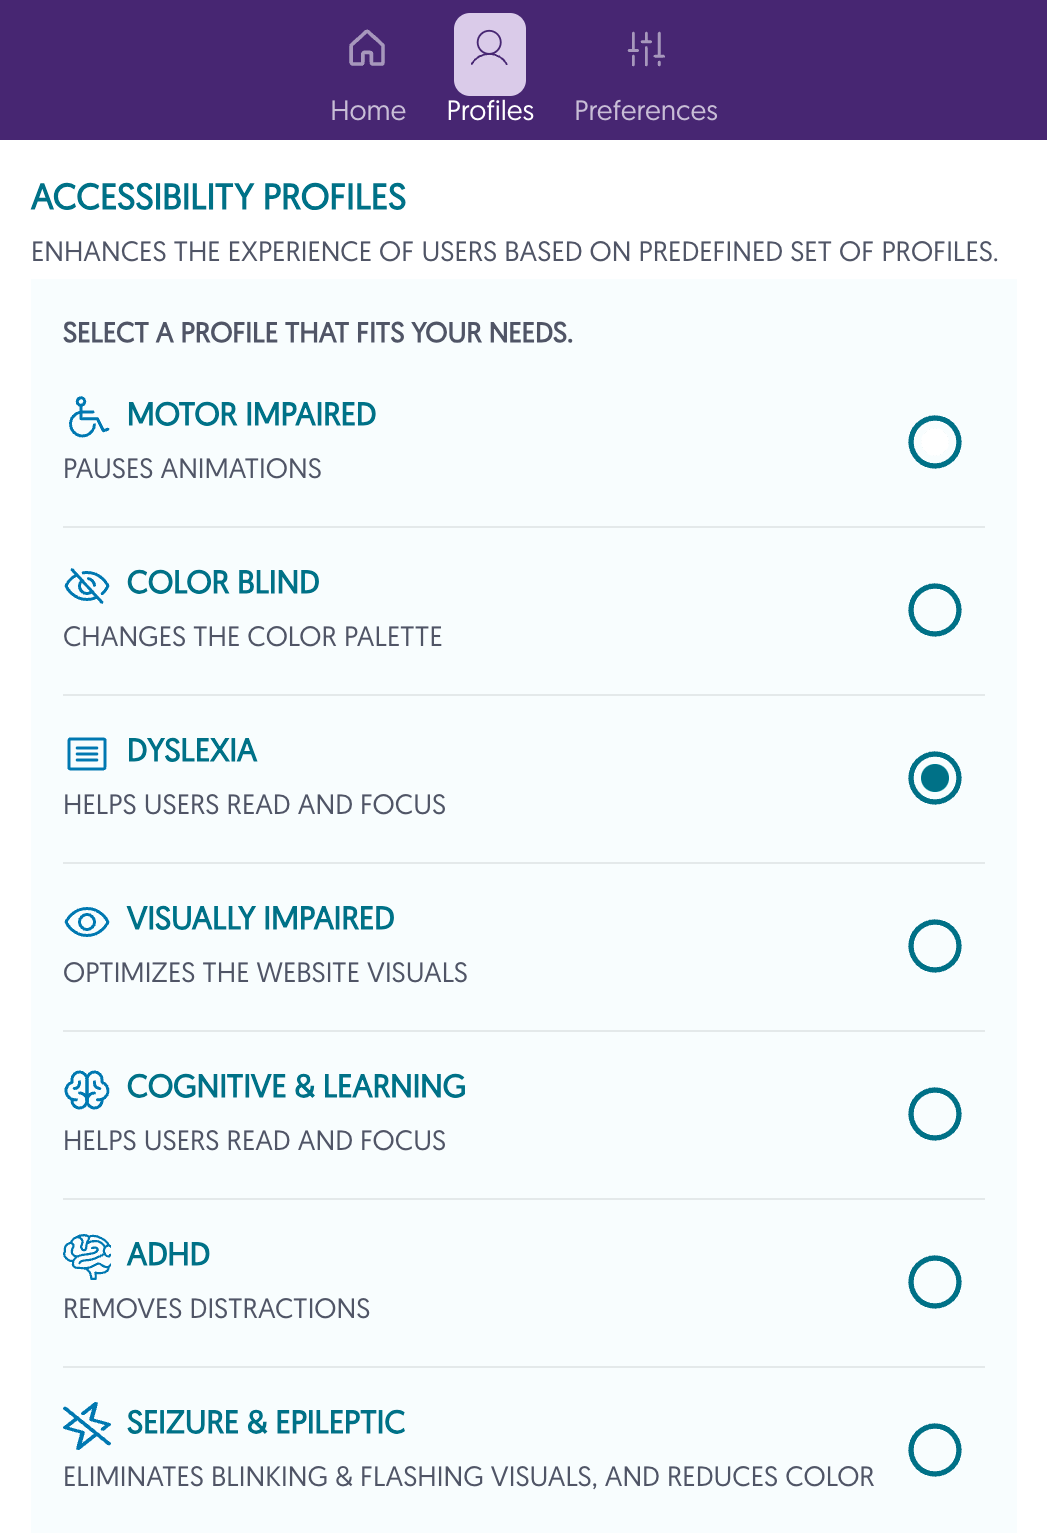 Pop-up of dyslexia profile options.